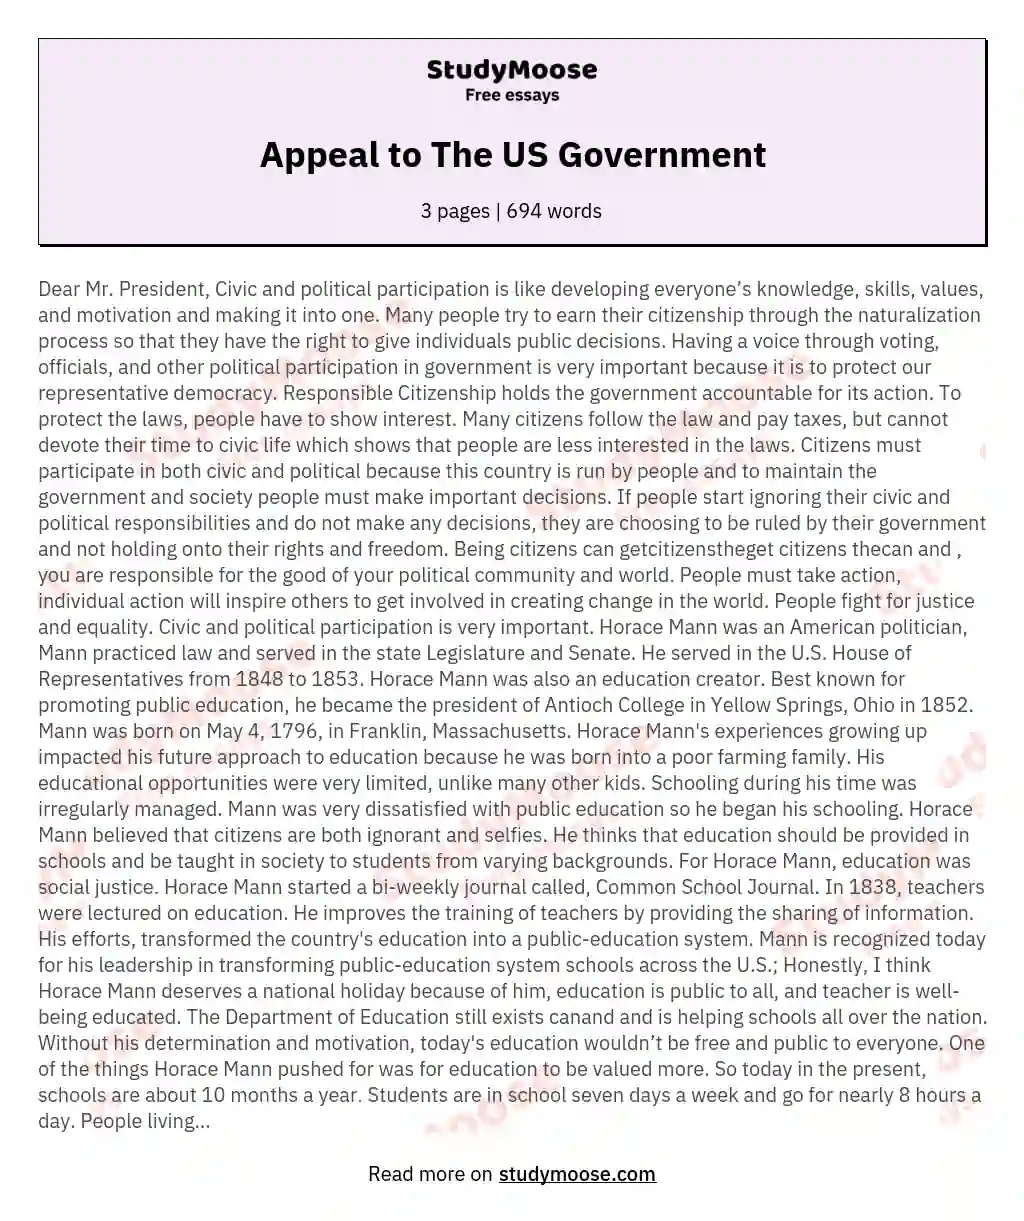 Appeal to The US Government essay